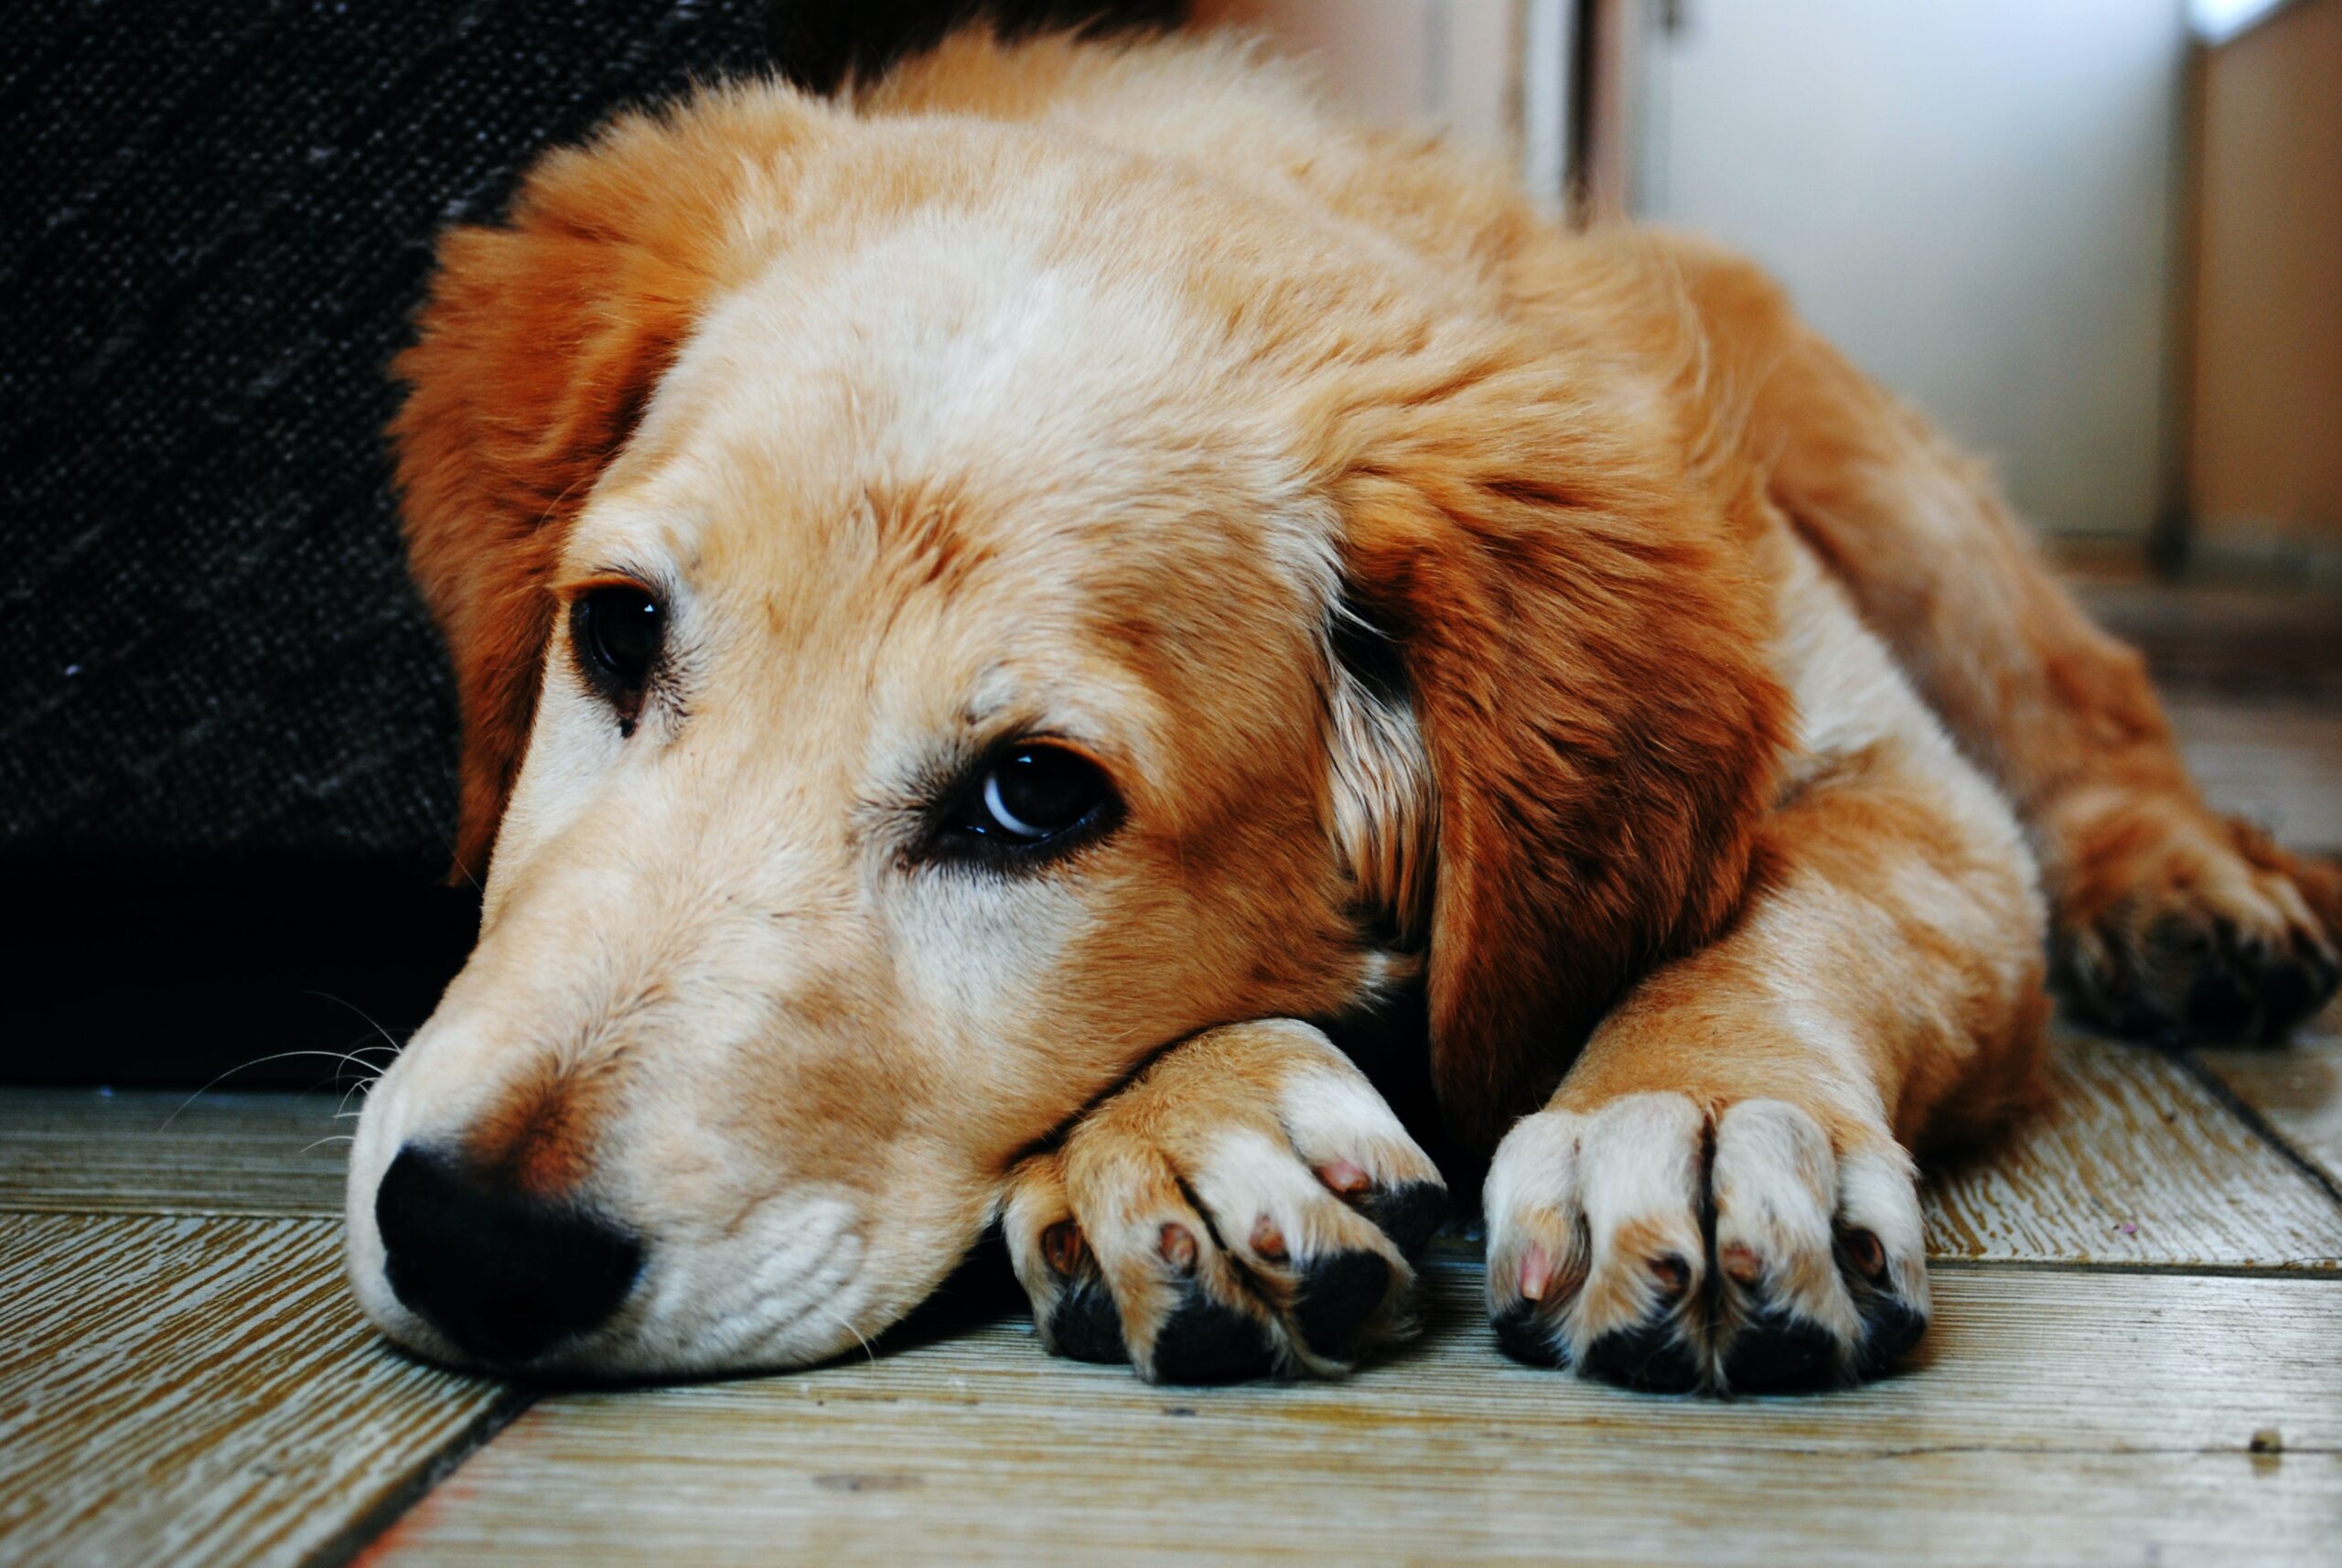 Seven Side Effects Of Too Much Salmon Oil For Dogs (And What To Do About It)